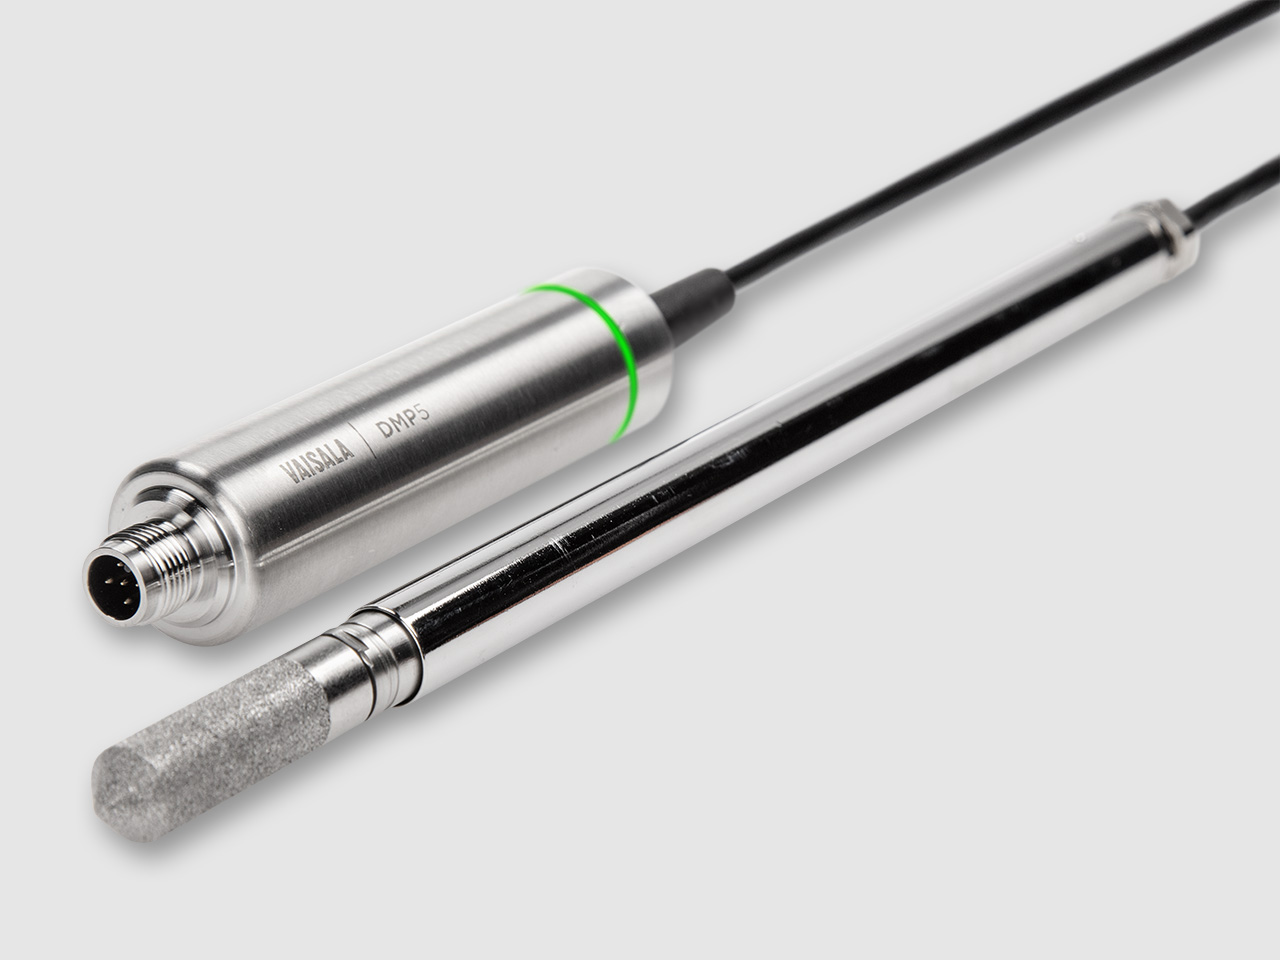 Vaisala DRYCAP®  Dew Point and Temperature Probe DMP5 is designed for in-line humidity measurement in industrial drying applications.